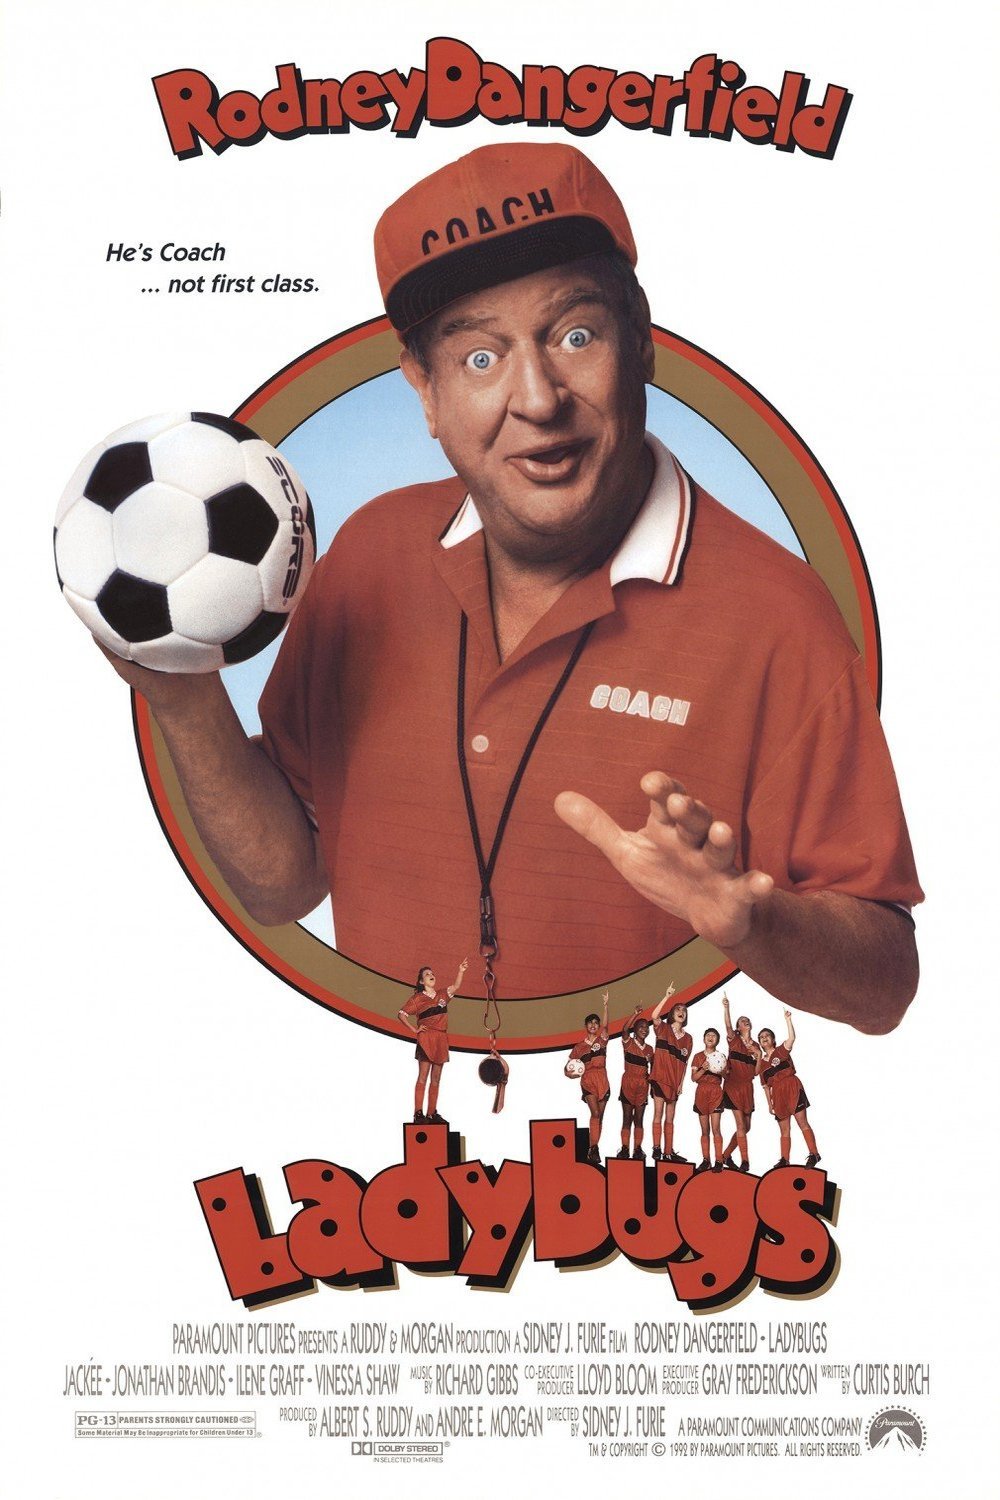 Poster of the movie Ladybugs